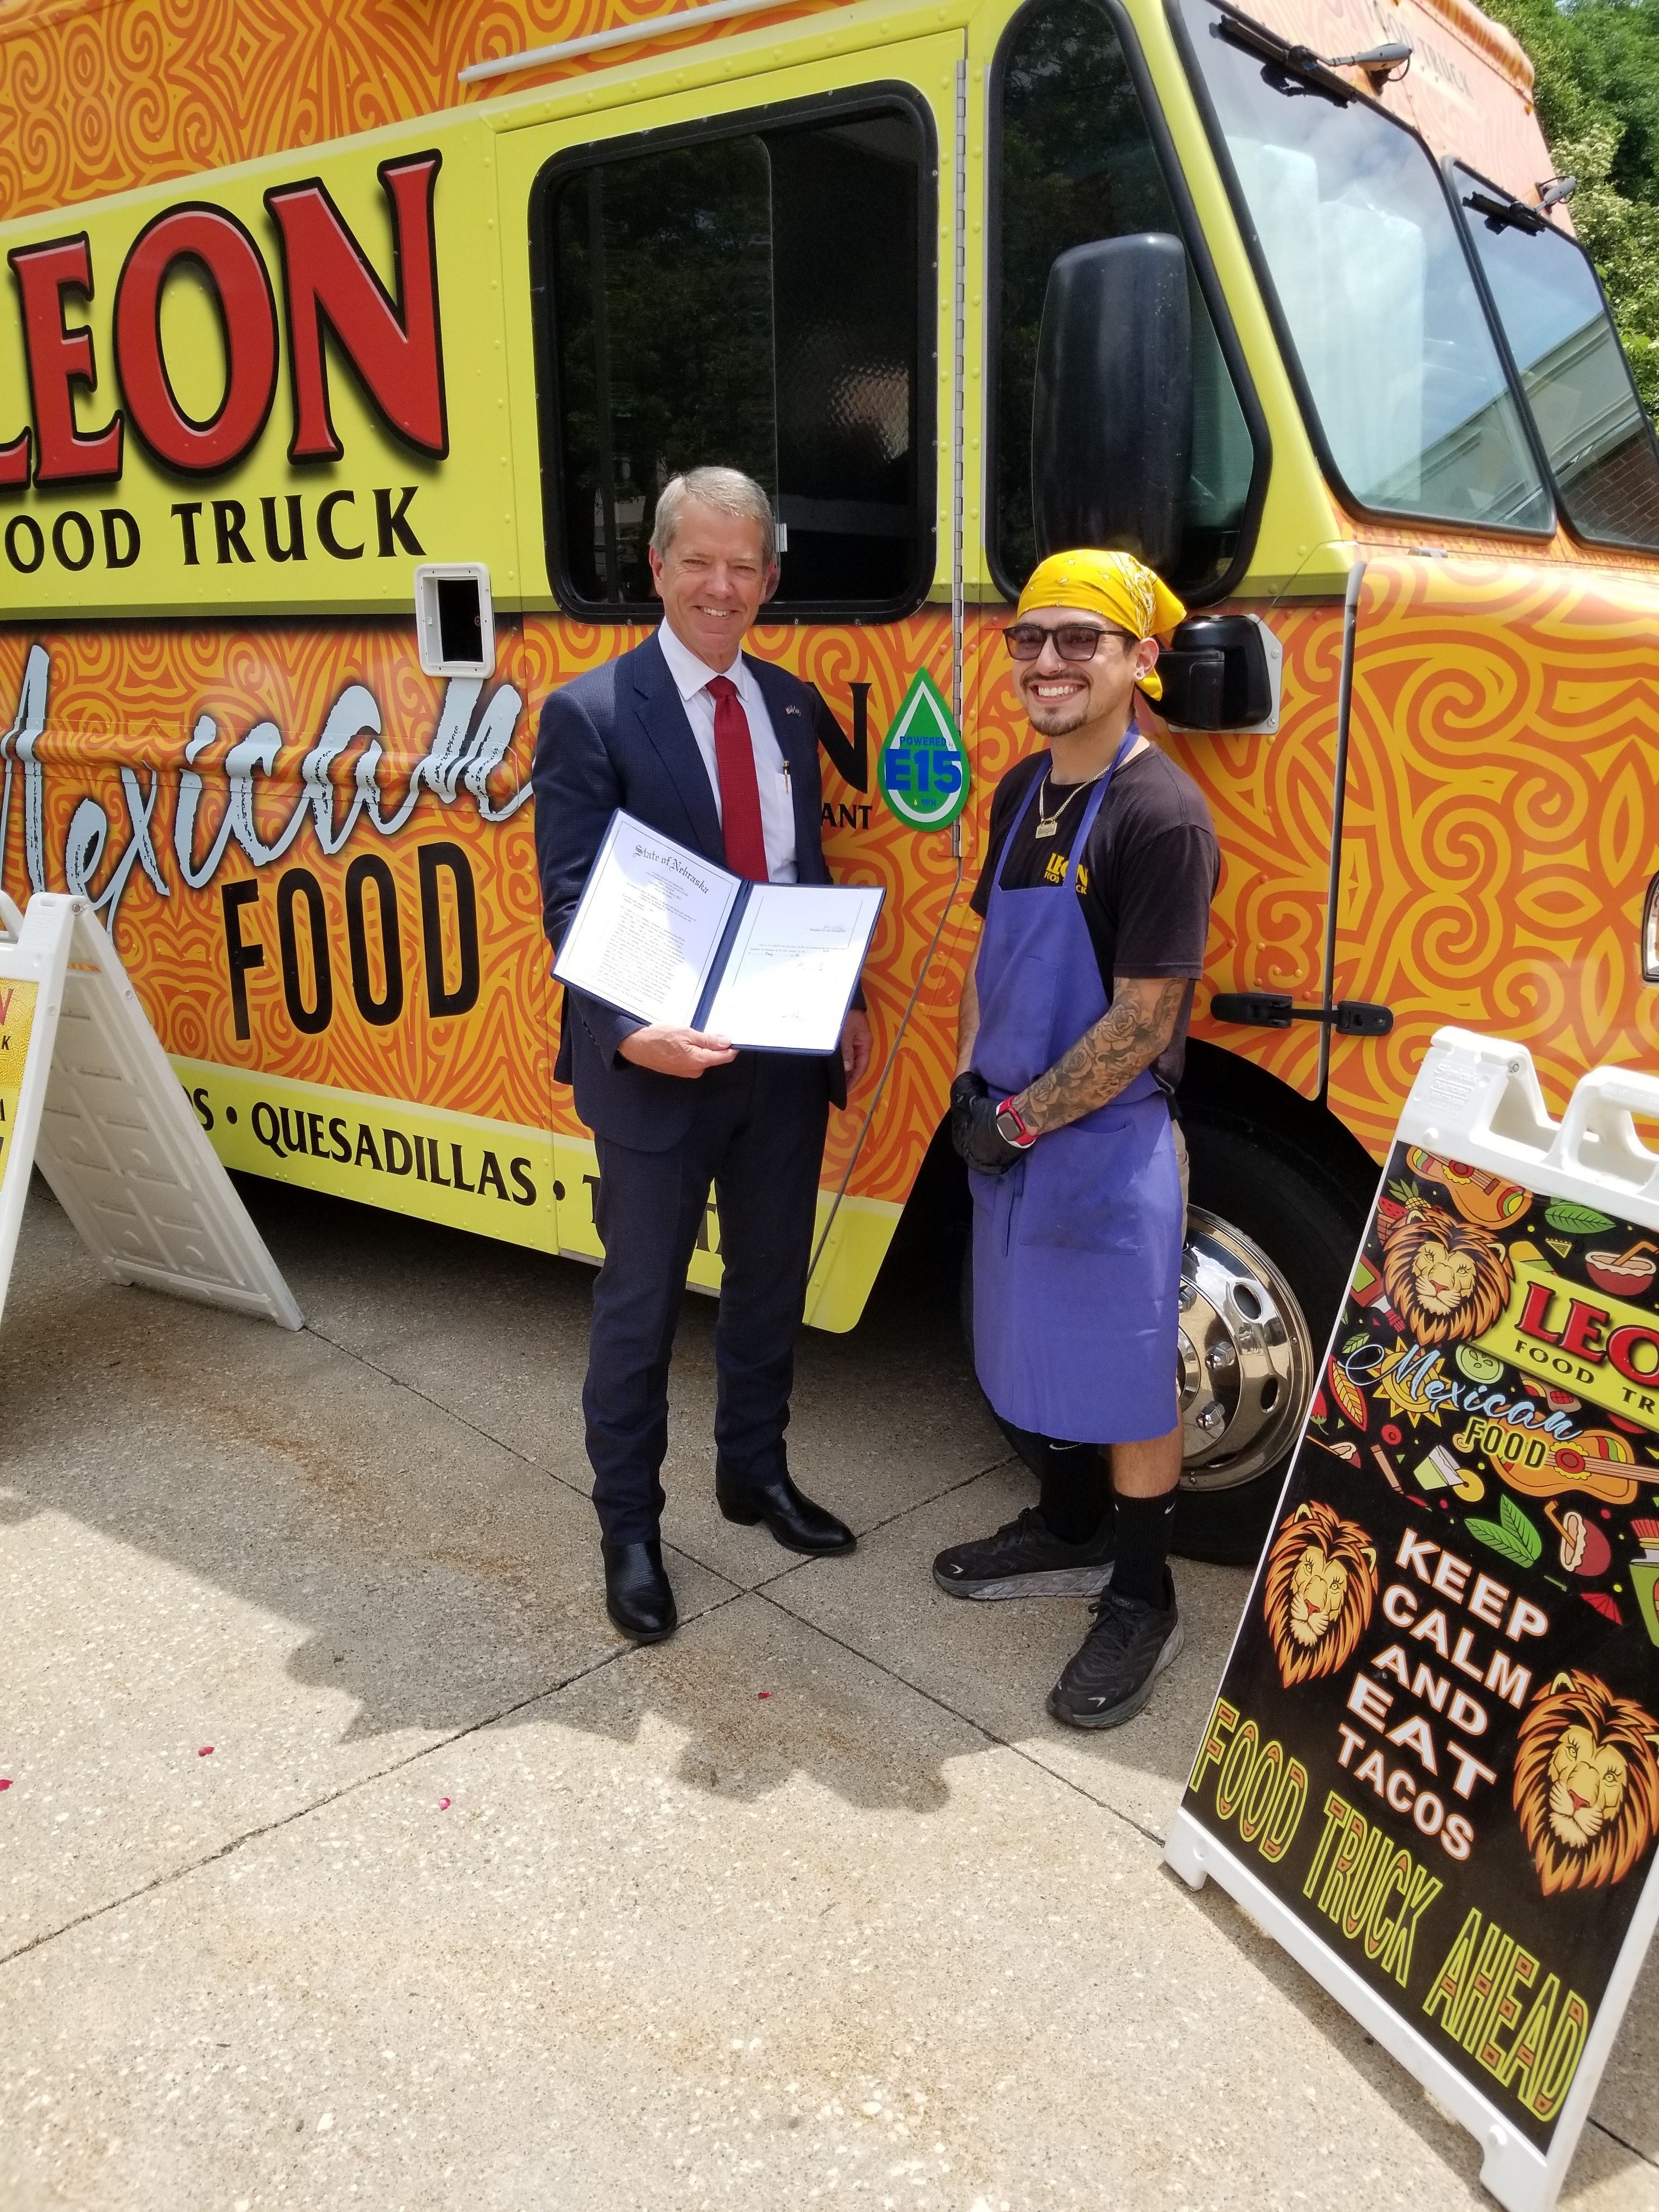 E15 Food Truck Serves Guests, as Governor Pillen Signs LB562